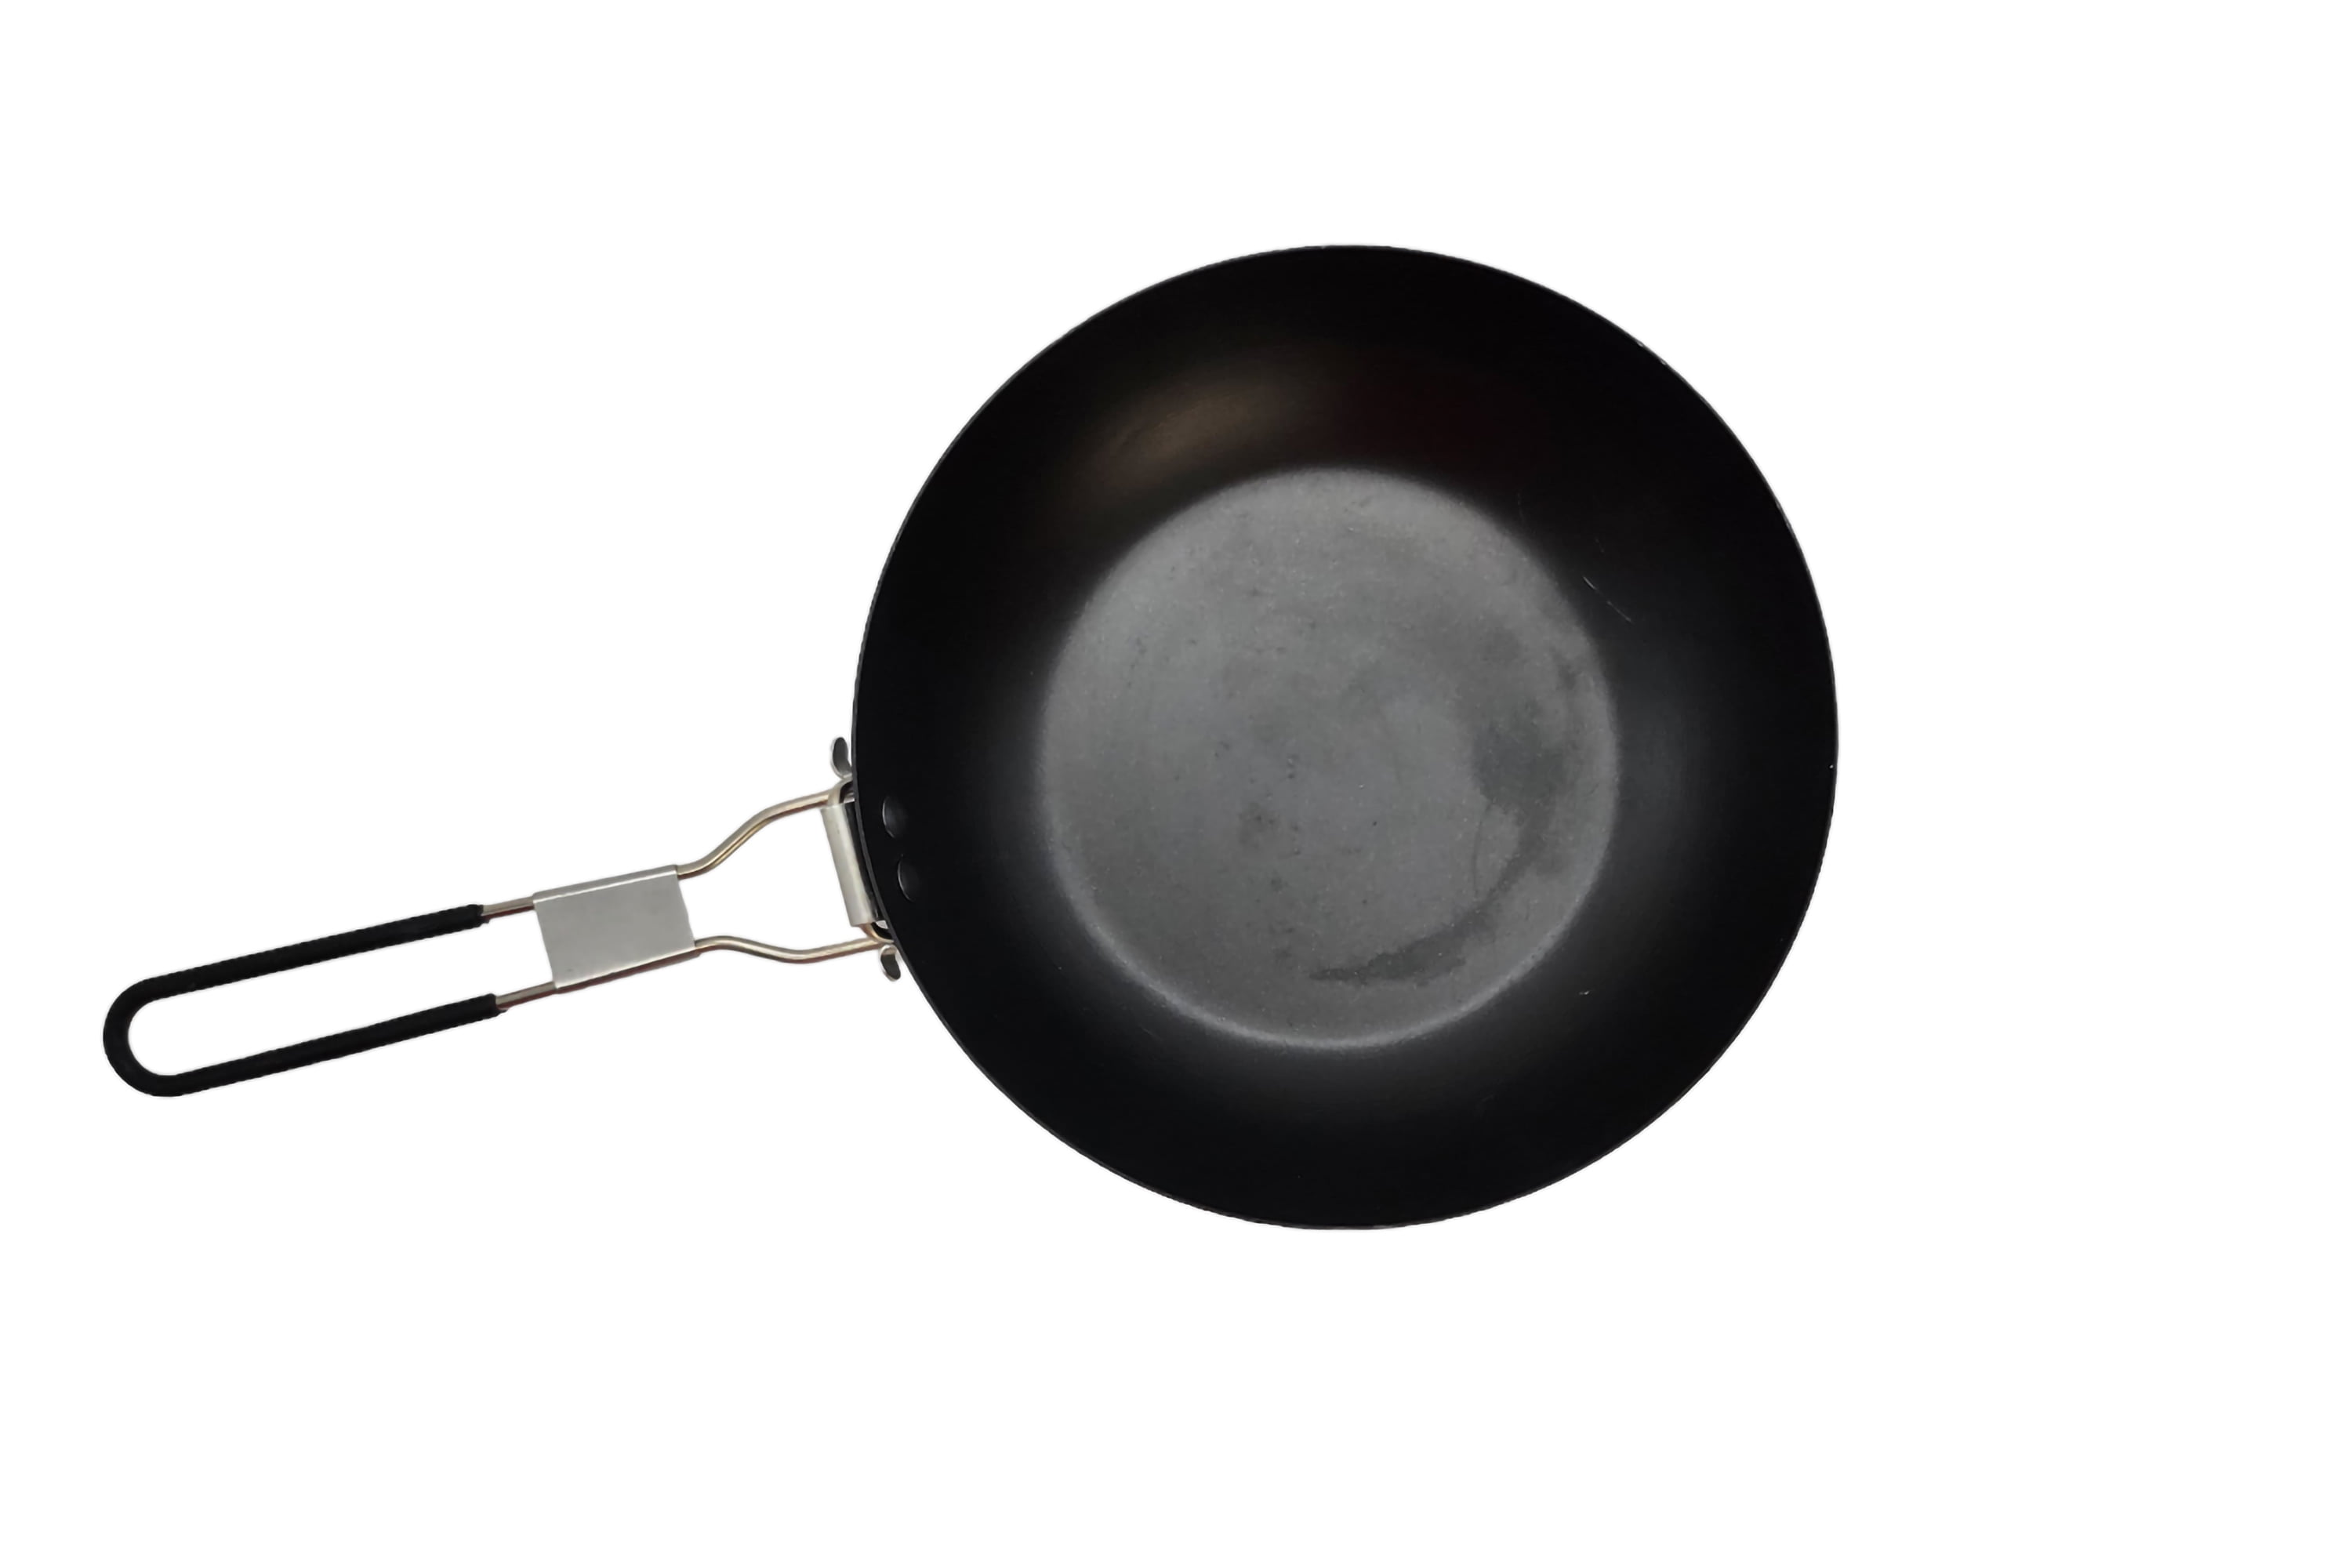 Ozark Trail 9.5 inch Camping Frying Pan Black Carbon Steel with Folding Handle, Size: Regular